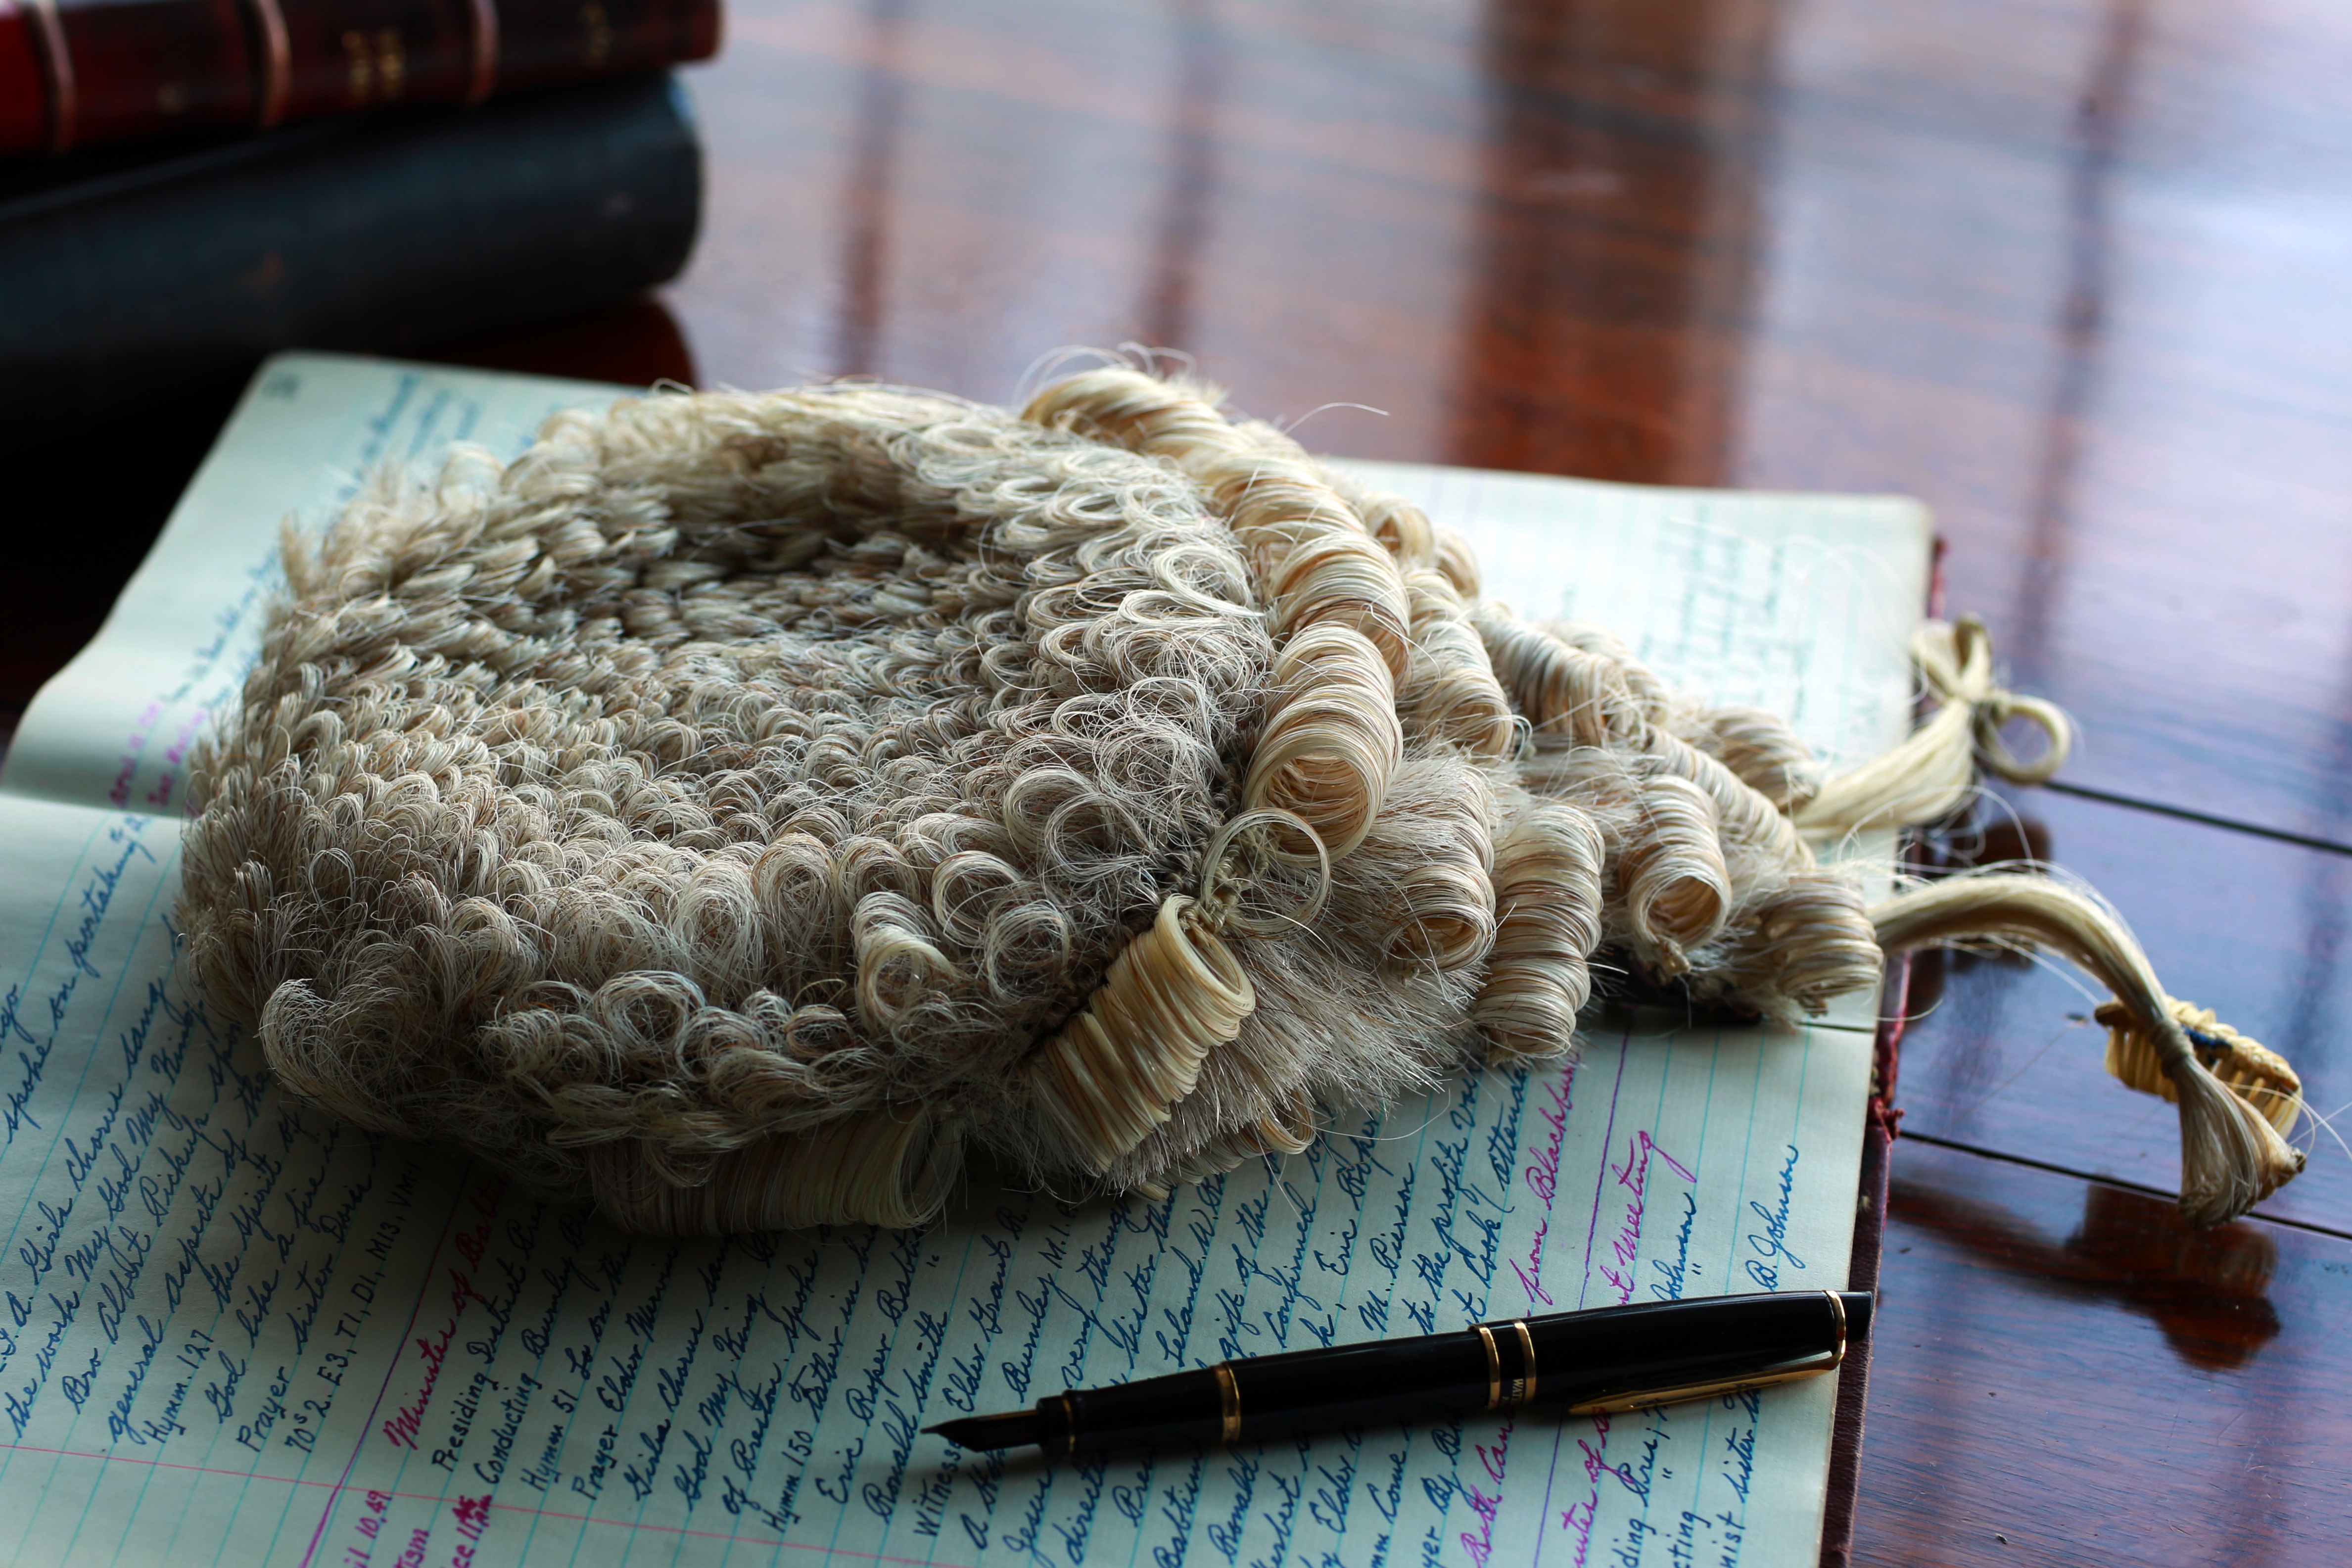 Judge wig on notebook